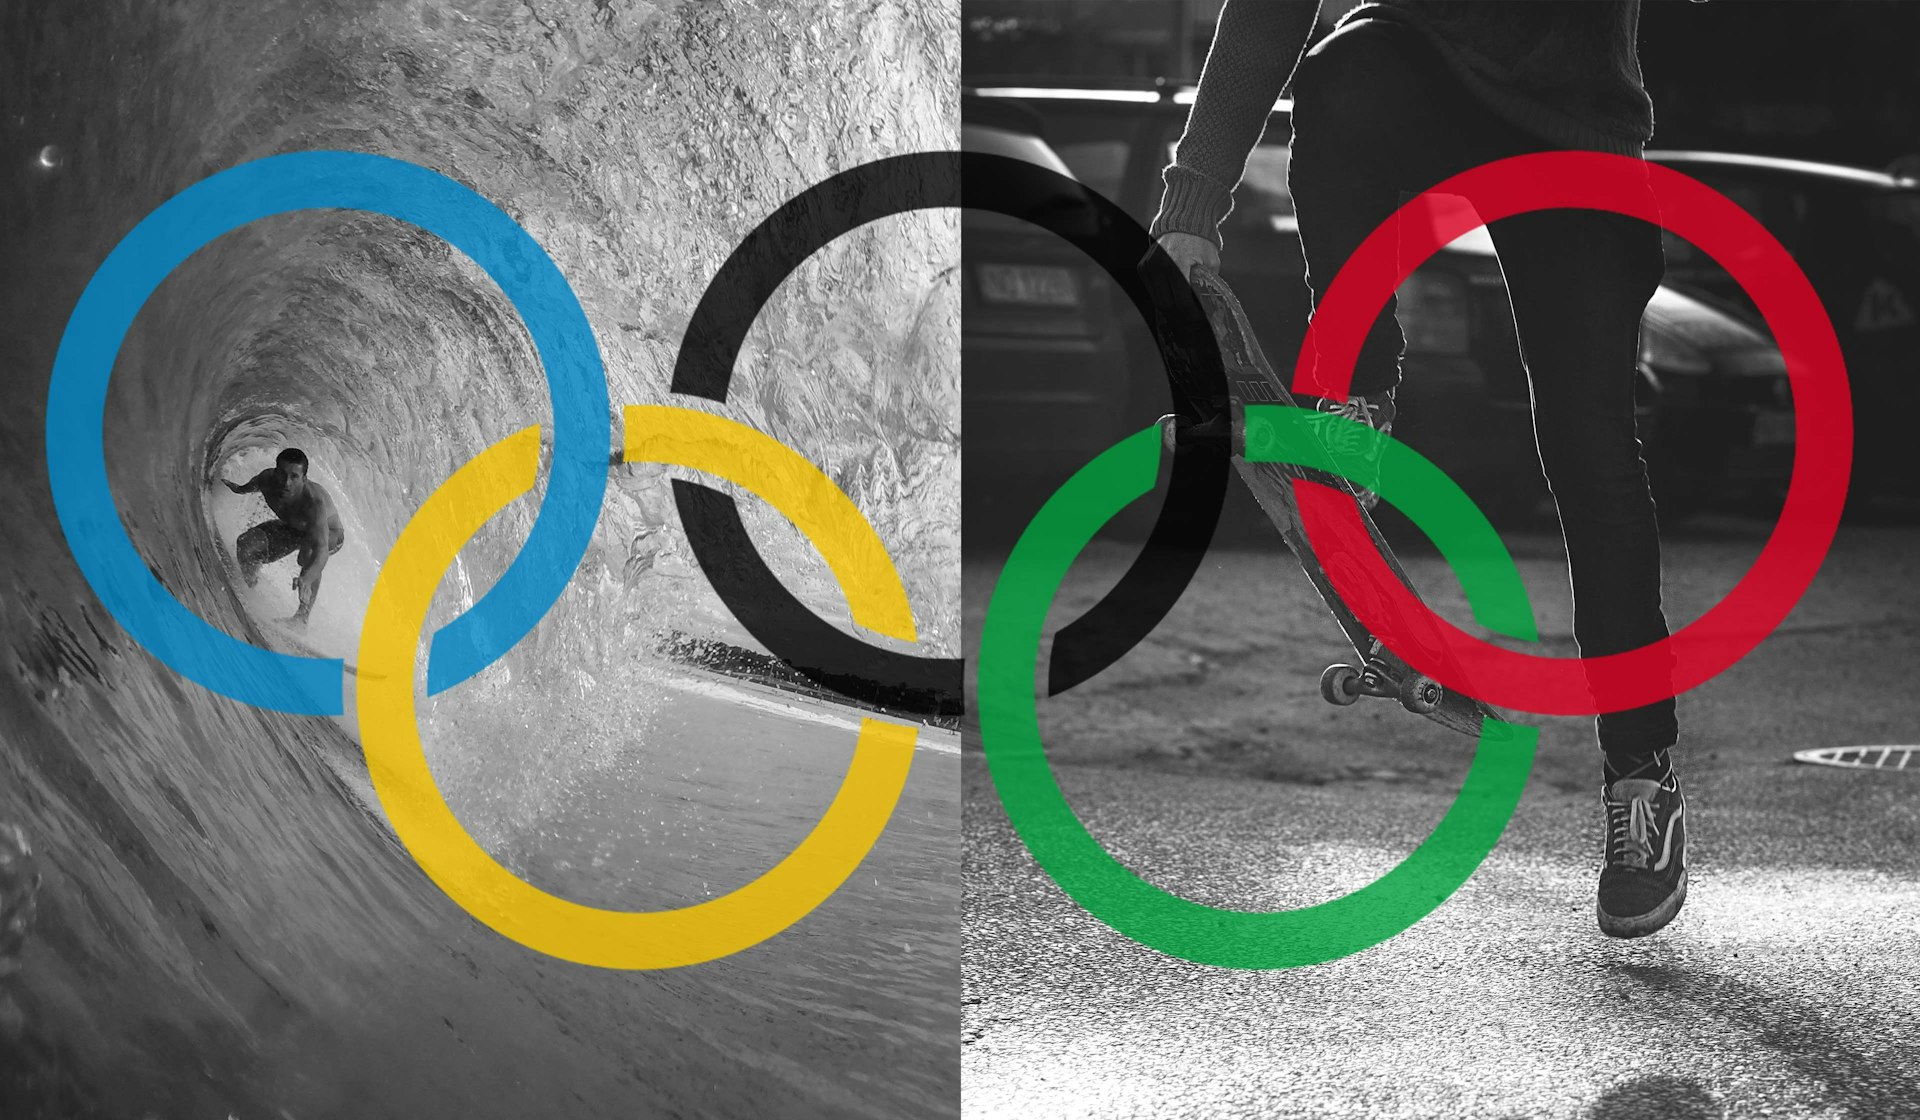 How will Olympic selection affect surfing and skateboarding?